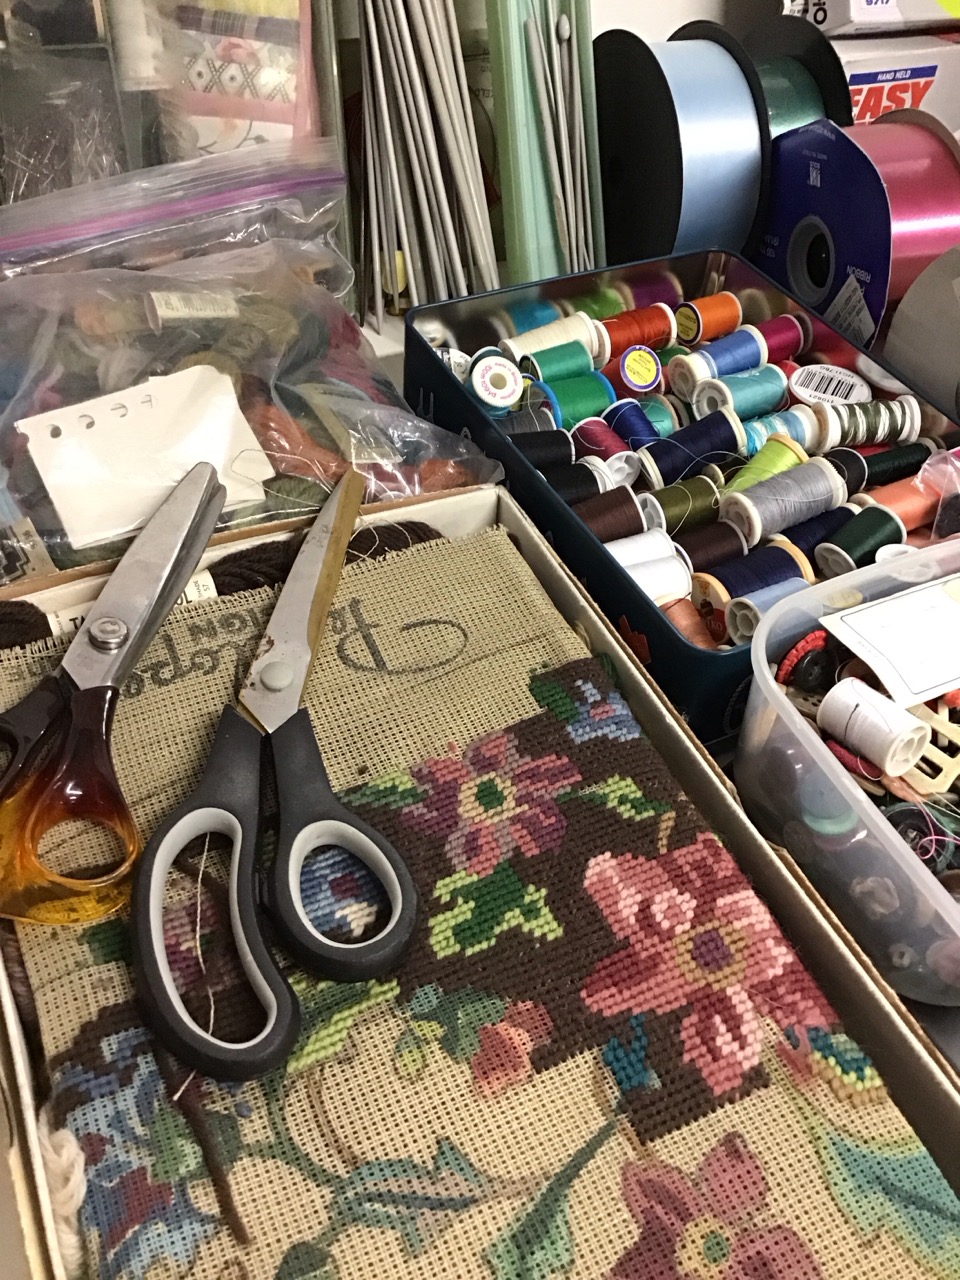 Miscellaneous textile crafting materials including spools of ribbon, rug making & tapestry wools, - Image 2 of 3